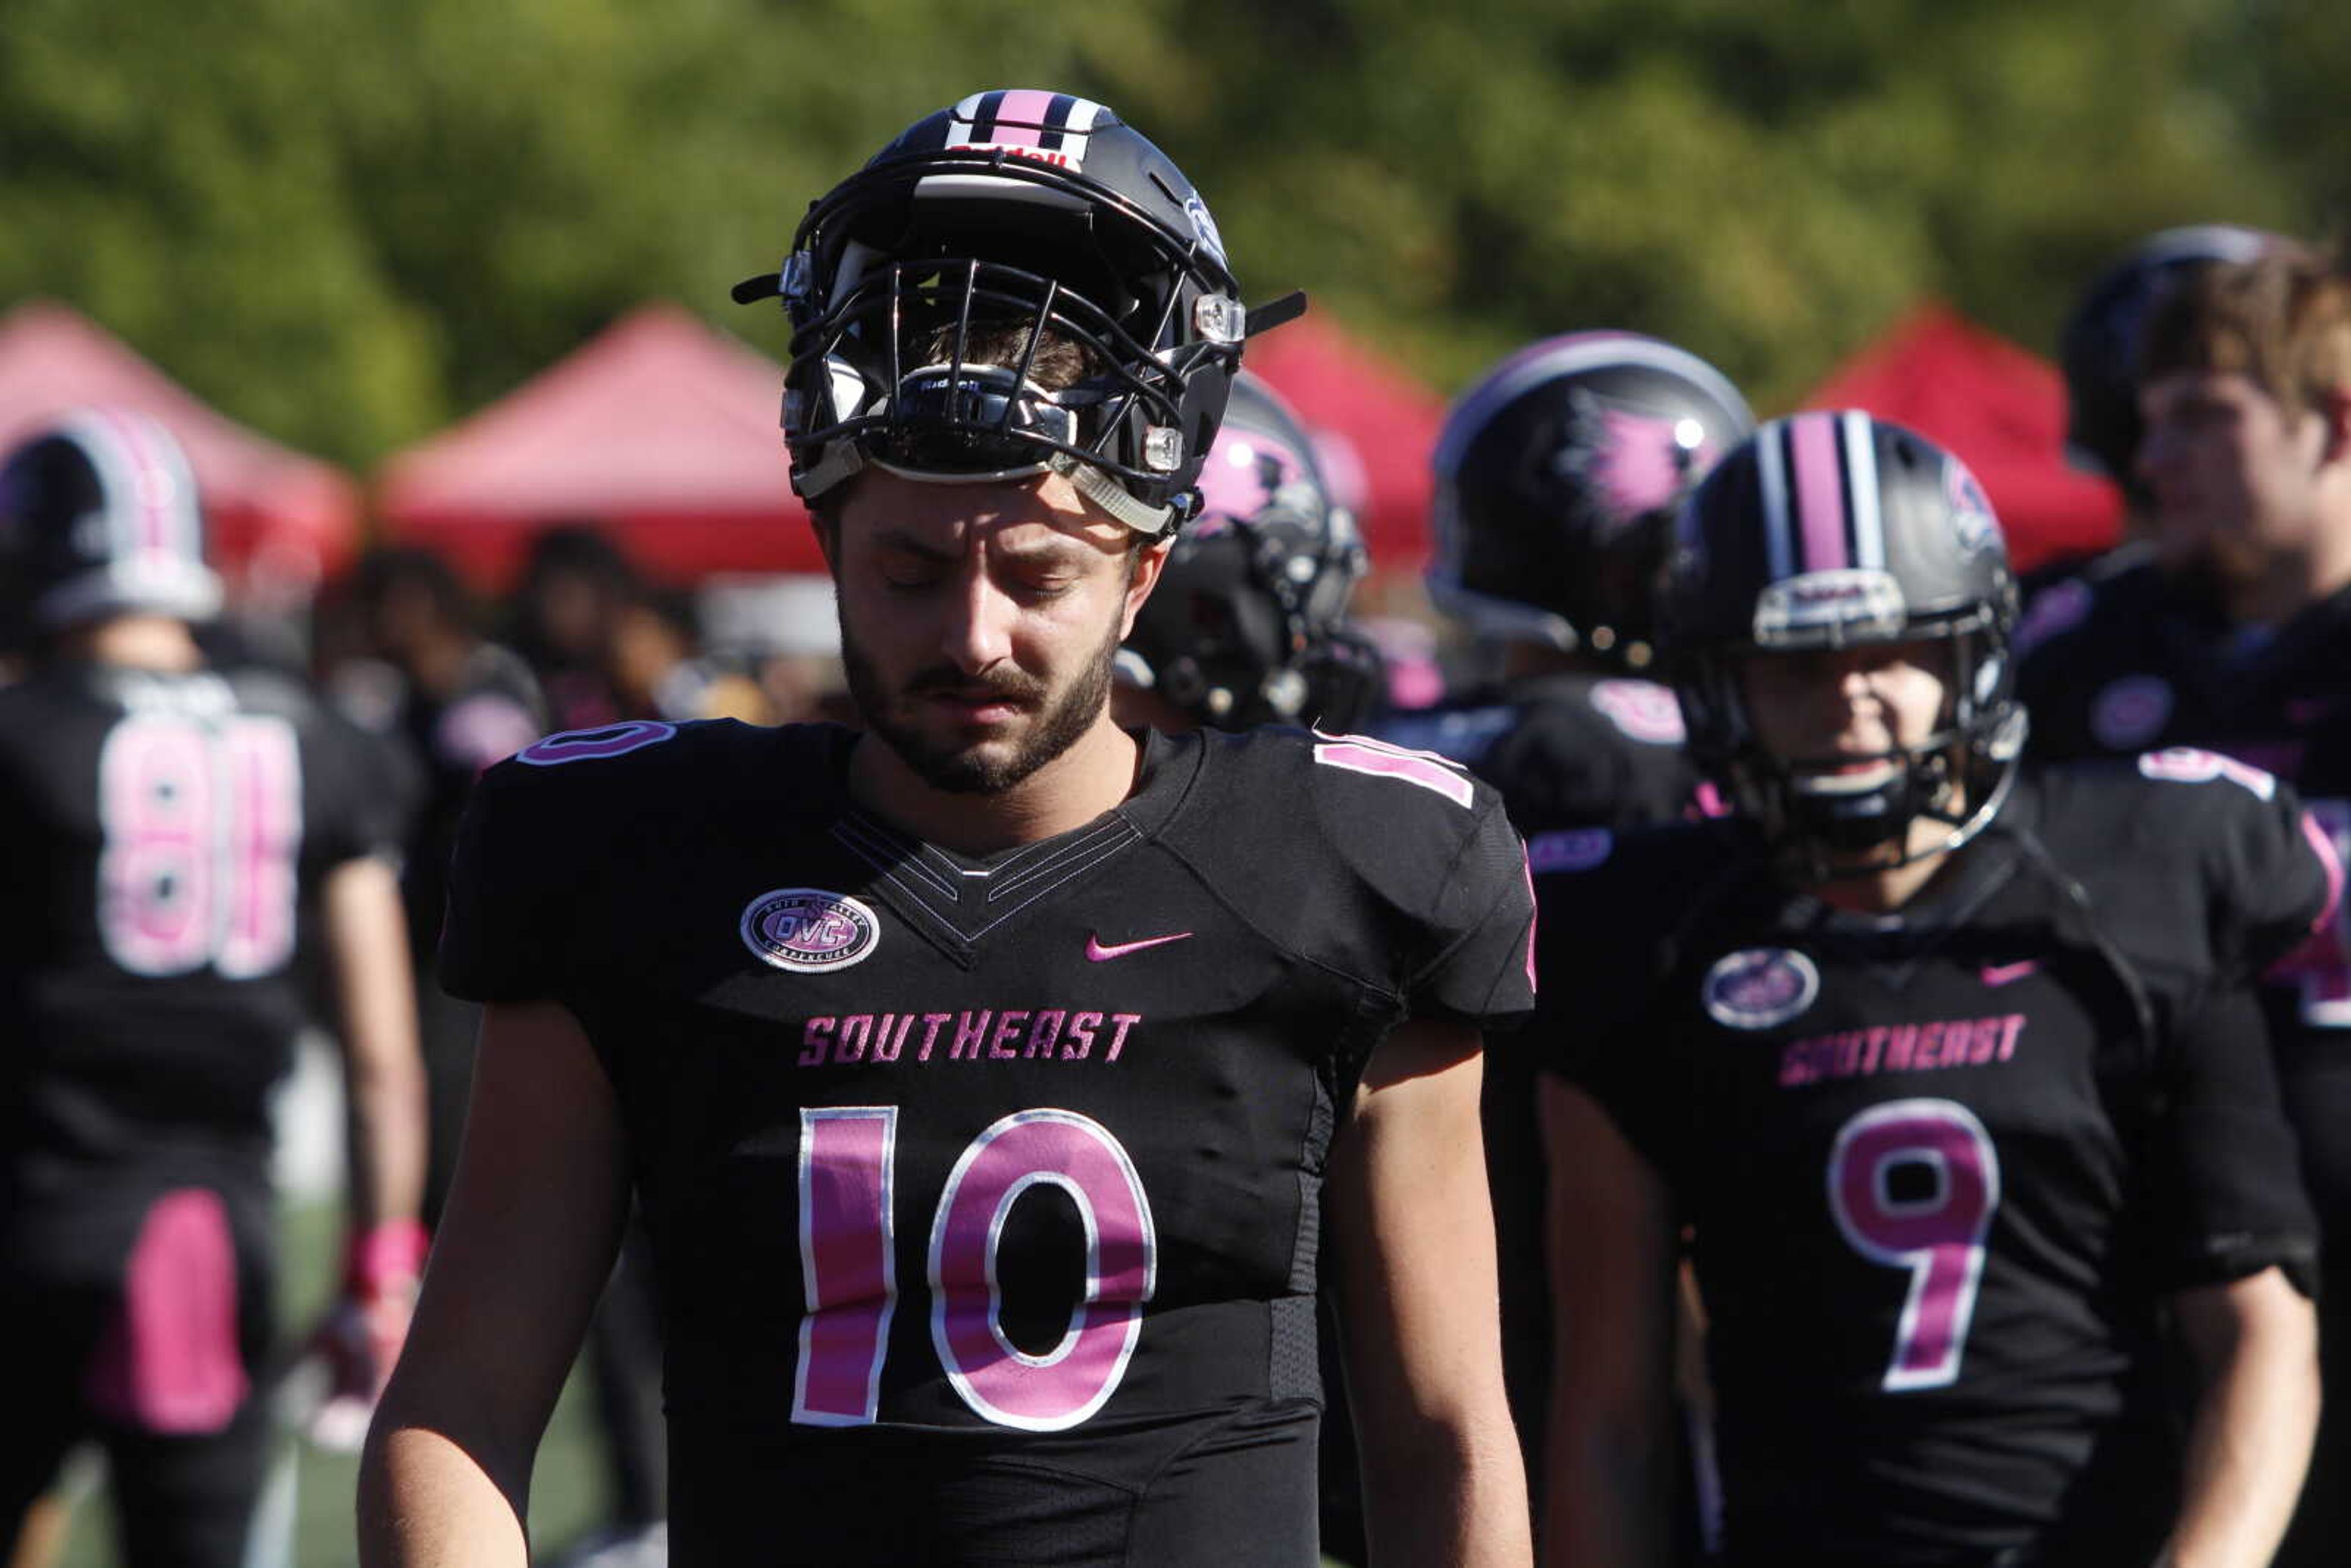 Junior quarterback Daniel Santacaterina comes off the field during the 37-14 win over Jacksonville State on Oct. 20.